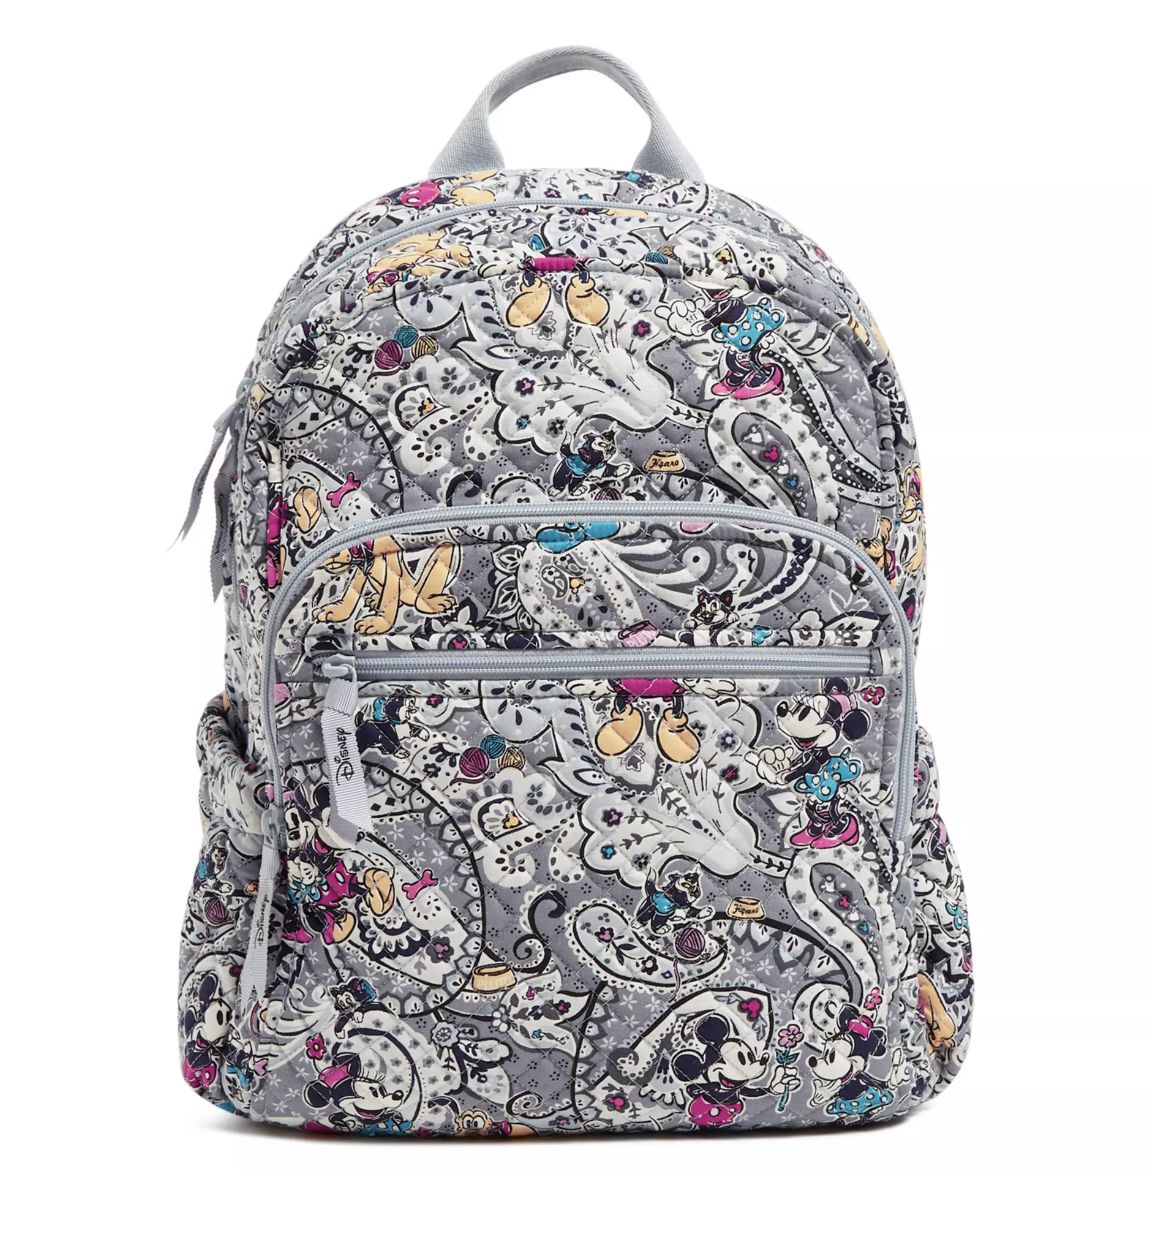 Disney Mickey and Friends Piccadilly Paisley Campus Backpack by Vera Bradley New